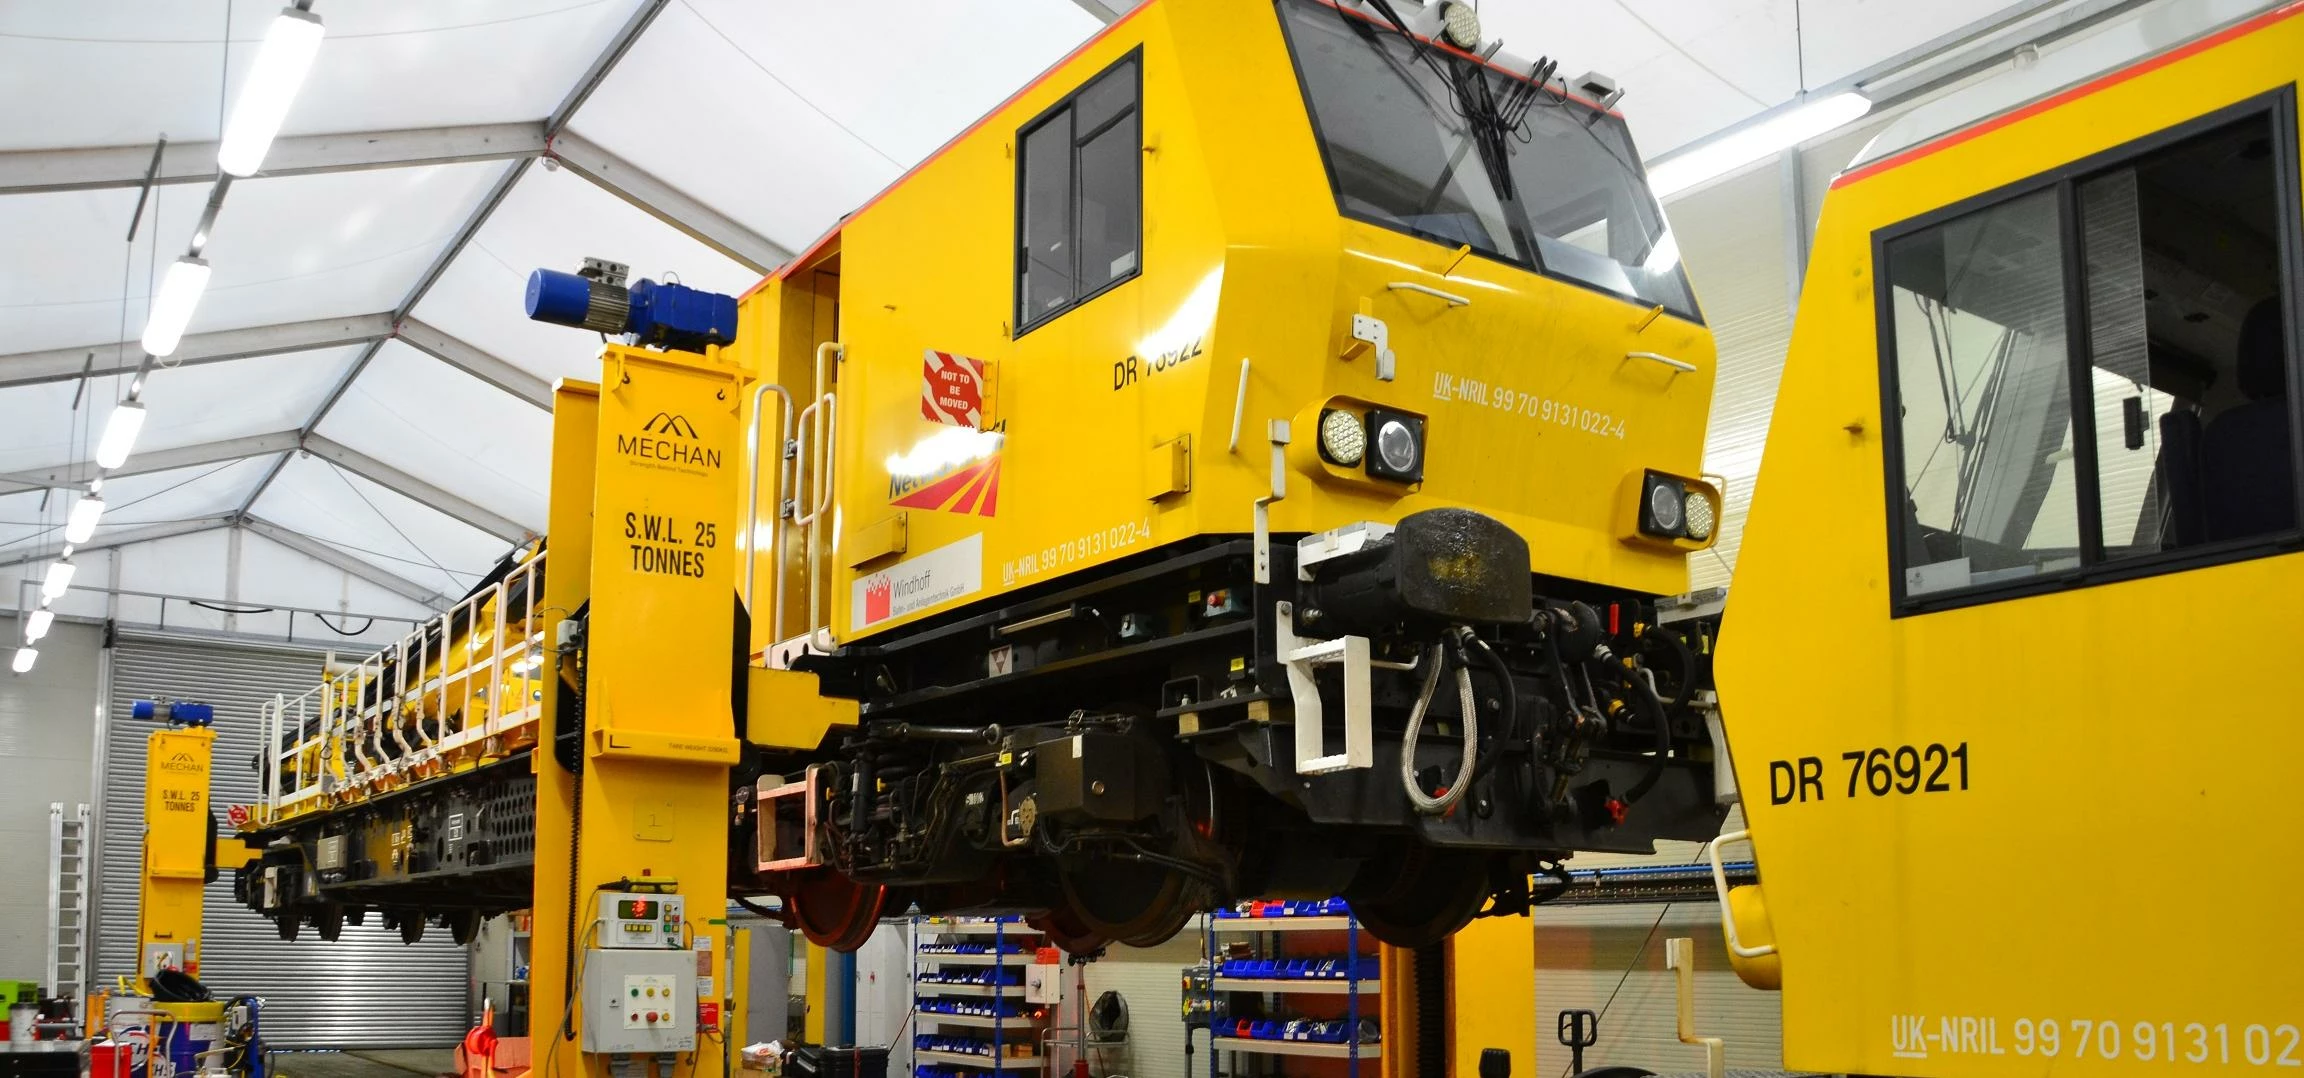 Mechan's jacks in action at Network Rail's High Output Operational Base near Swindon